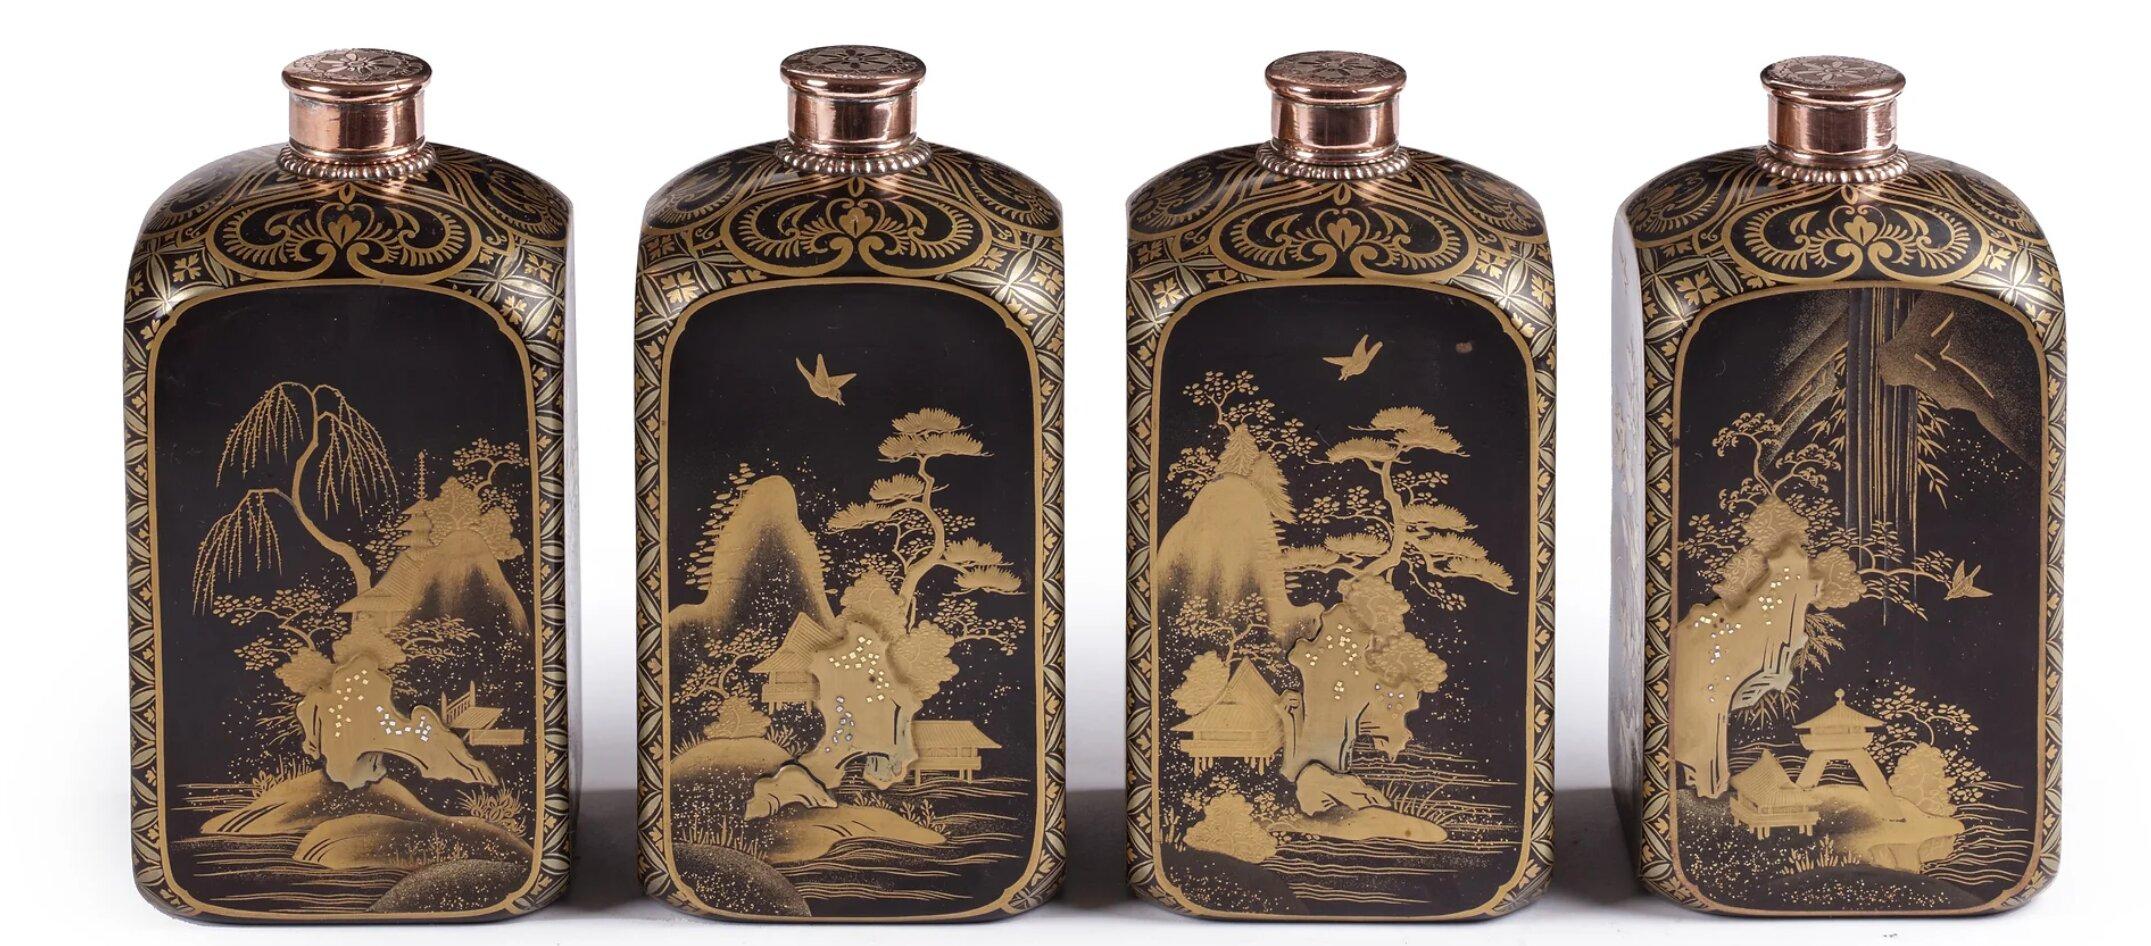 A set of four extremely rare and important pictorial-style Japanese export lacquer bottles

Edo-period, circa 1650-1680

H. 15.5 x W. 6.9 x B. 7.6 cm (each)

The bottles with red copper (possibly once silvered) lids that screw onto short metal